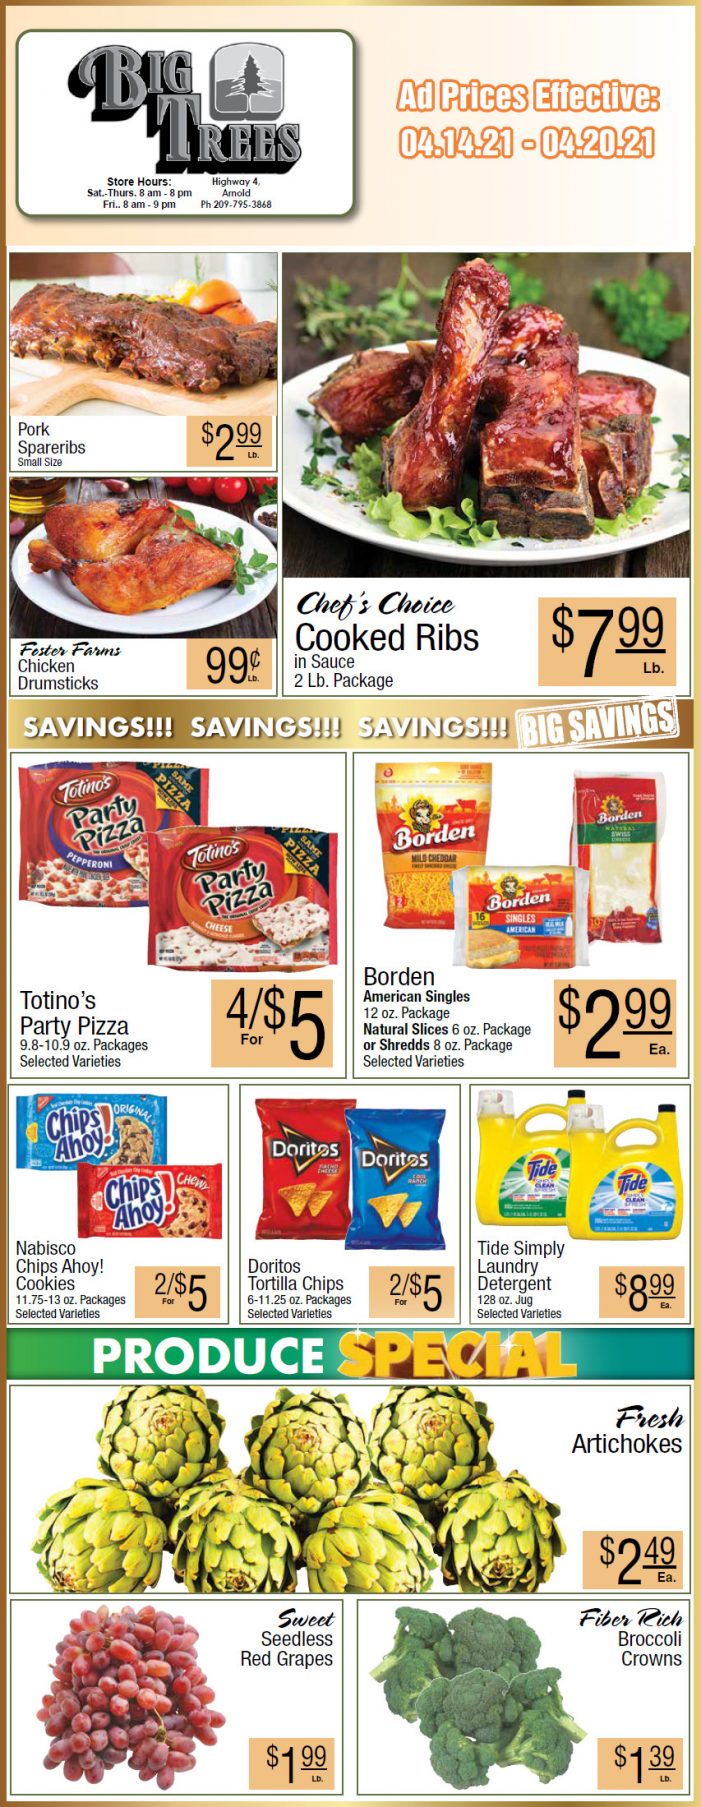 Big Trees Market Weekly Ad & Grocery Specials Through April 20th!  Shop Local & Save!!